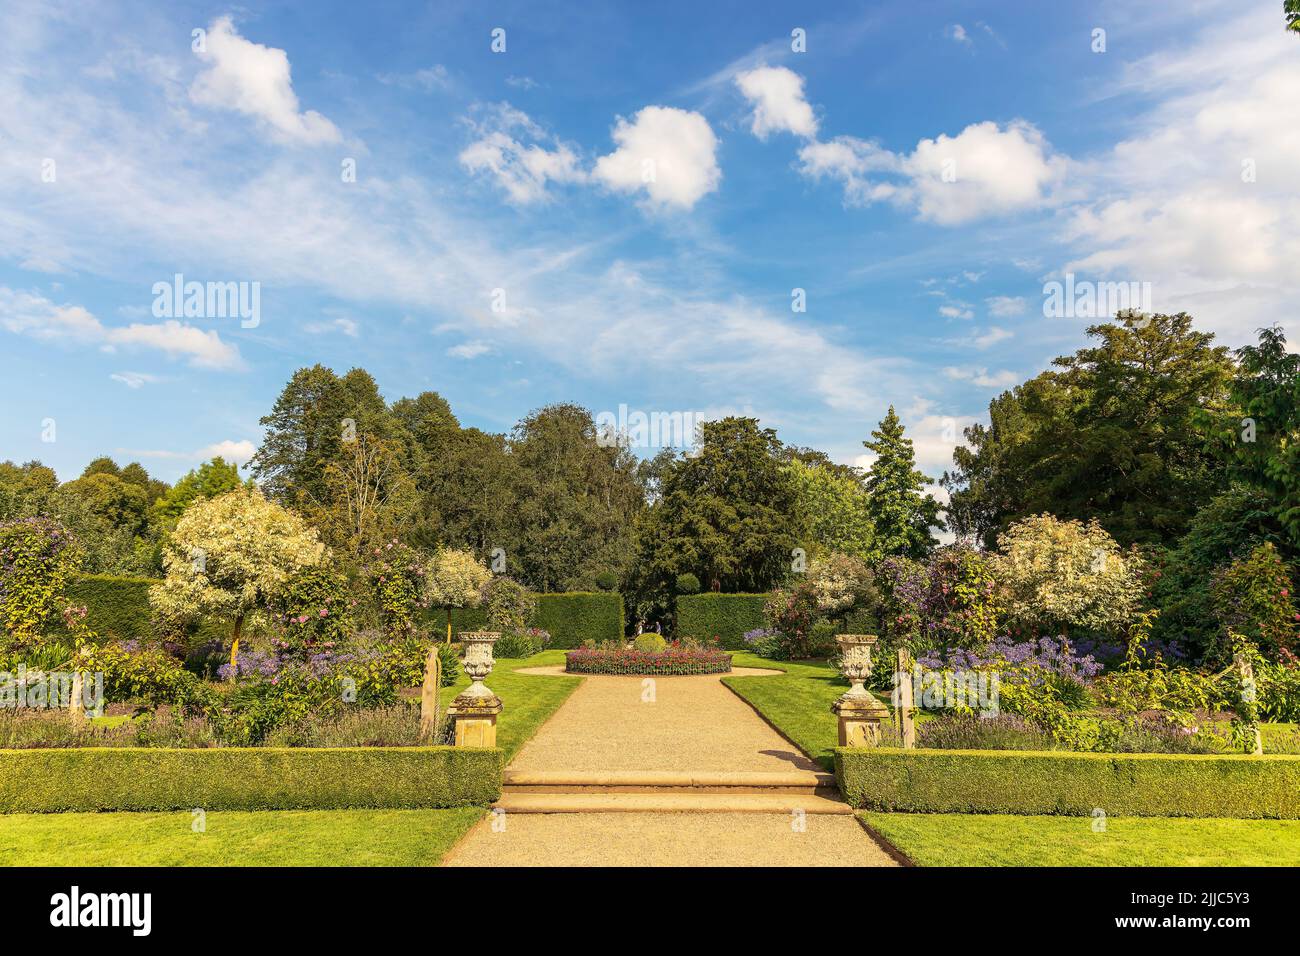 The 18 century gardens of Erddig Hall an historic 17th century mansion and parkland in Shropshire one of the most visited stately homes in UK. Stock Photo